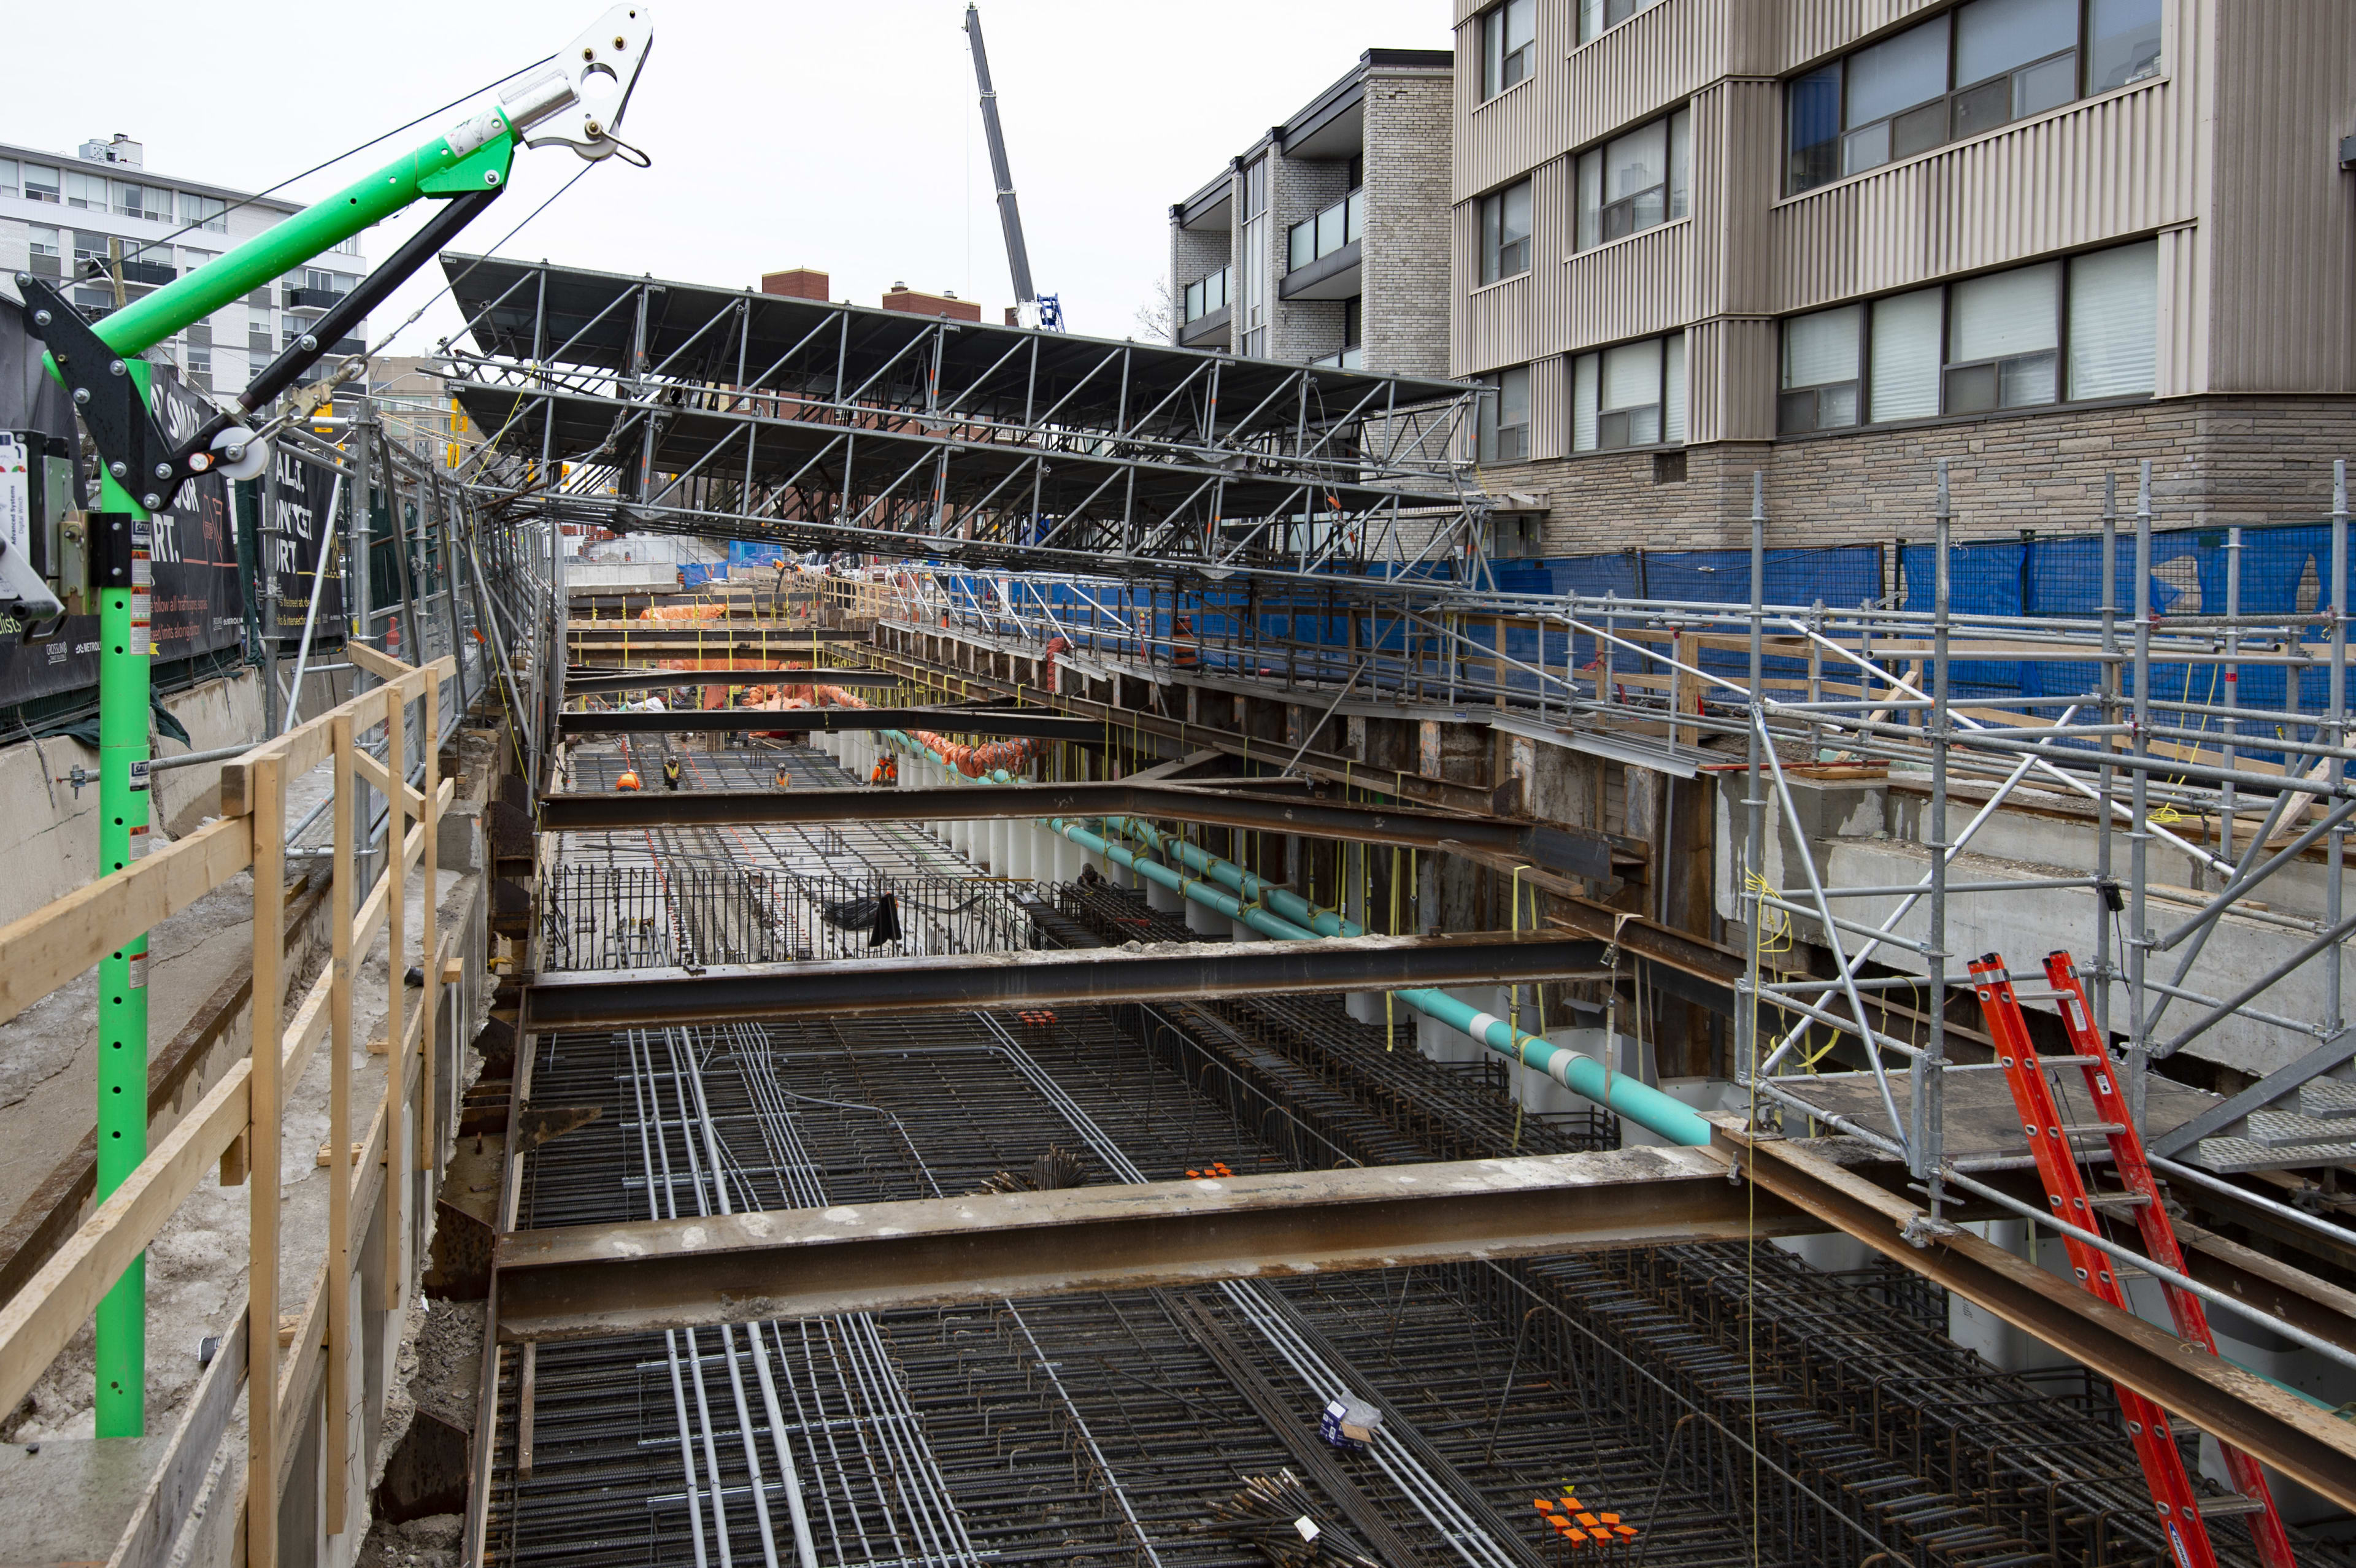 Metal supports and rebar line the subsection of construction work.